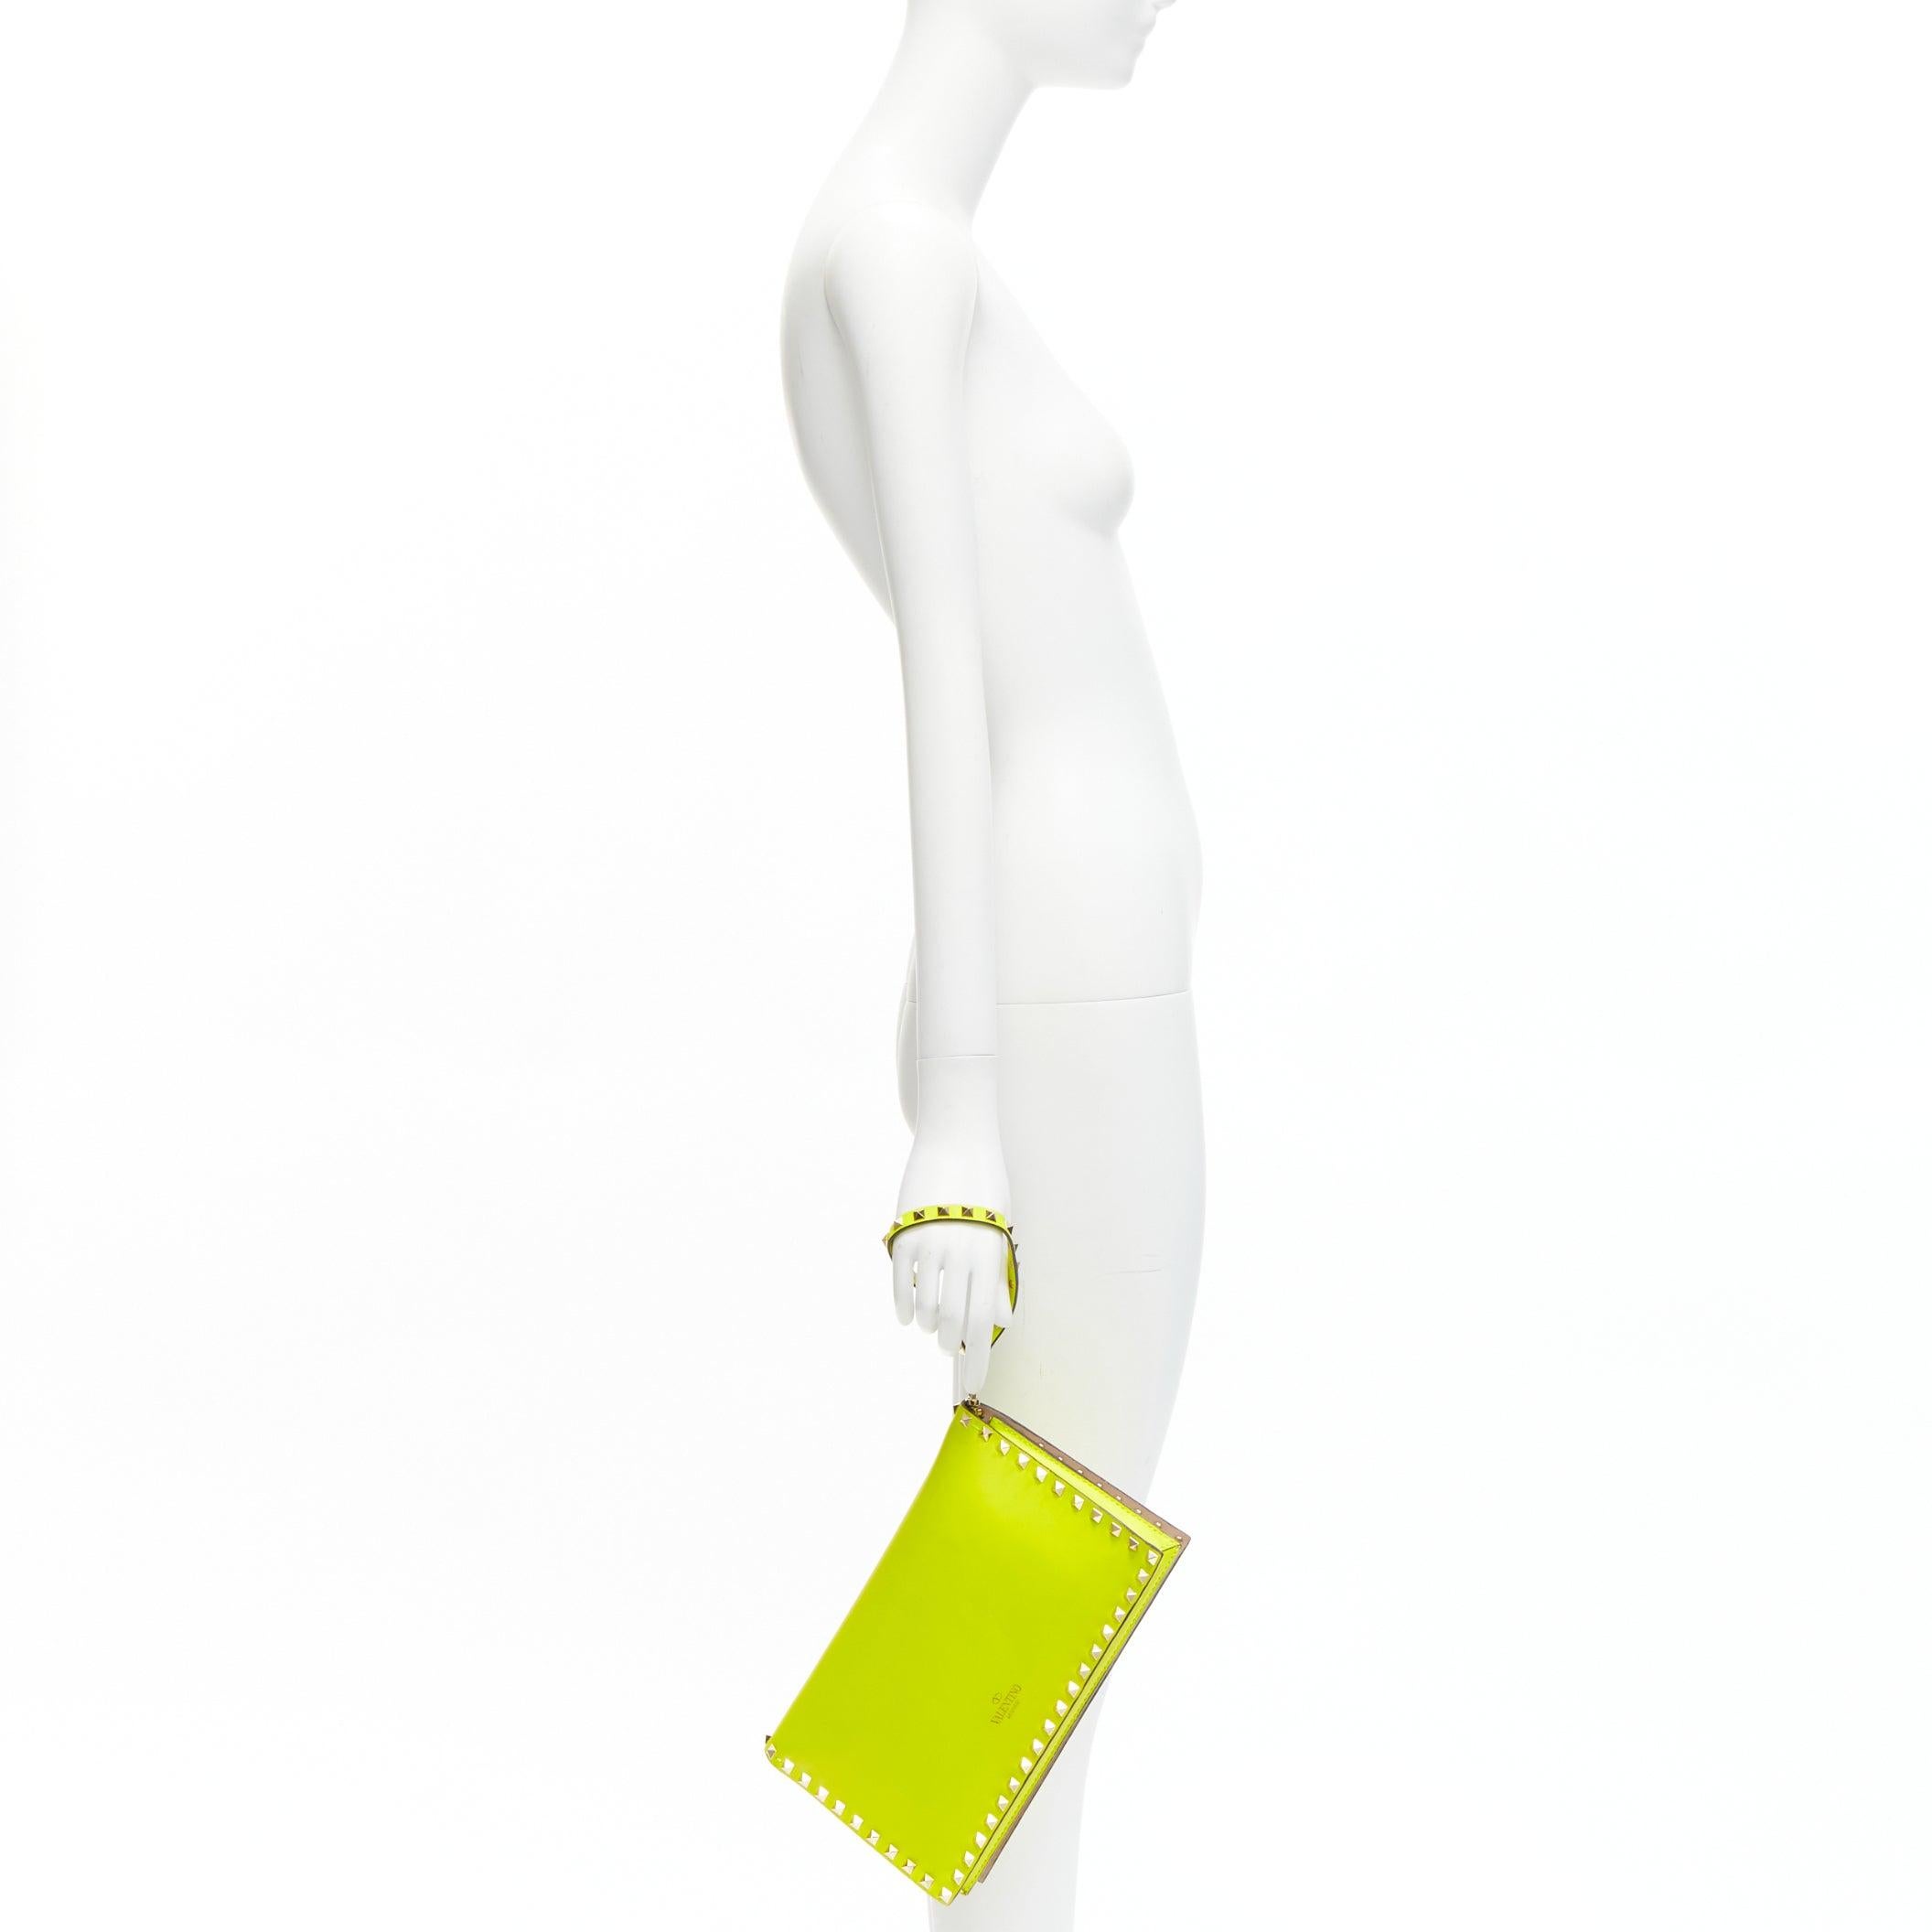 VALENTINO Rockstud neon yellow studded leather flap wristlet clutch bag
Reference: TGAS/D00683
Brand: Valentino
Designer: Pier Paolo Piccioli
Model: Rockstud
Material: Leather, Metal
Color: Neon Yellow
Pattern: Solid
Closure: Snap Buttons
Lining: